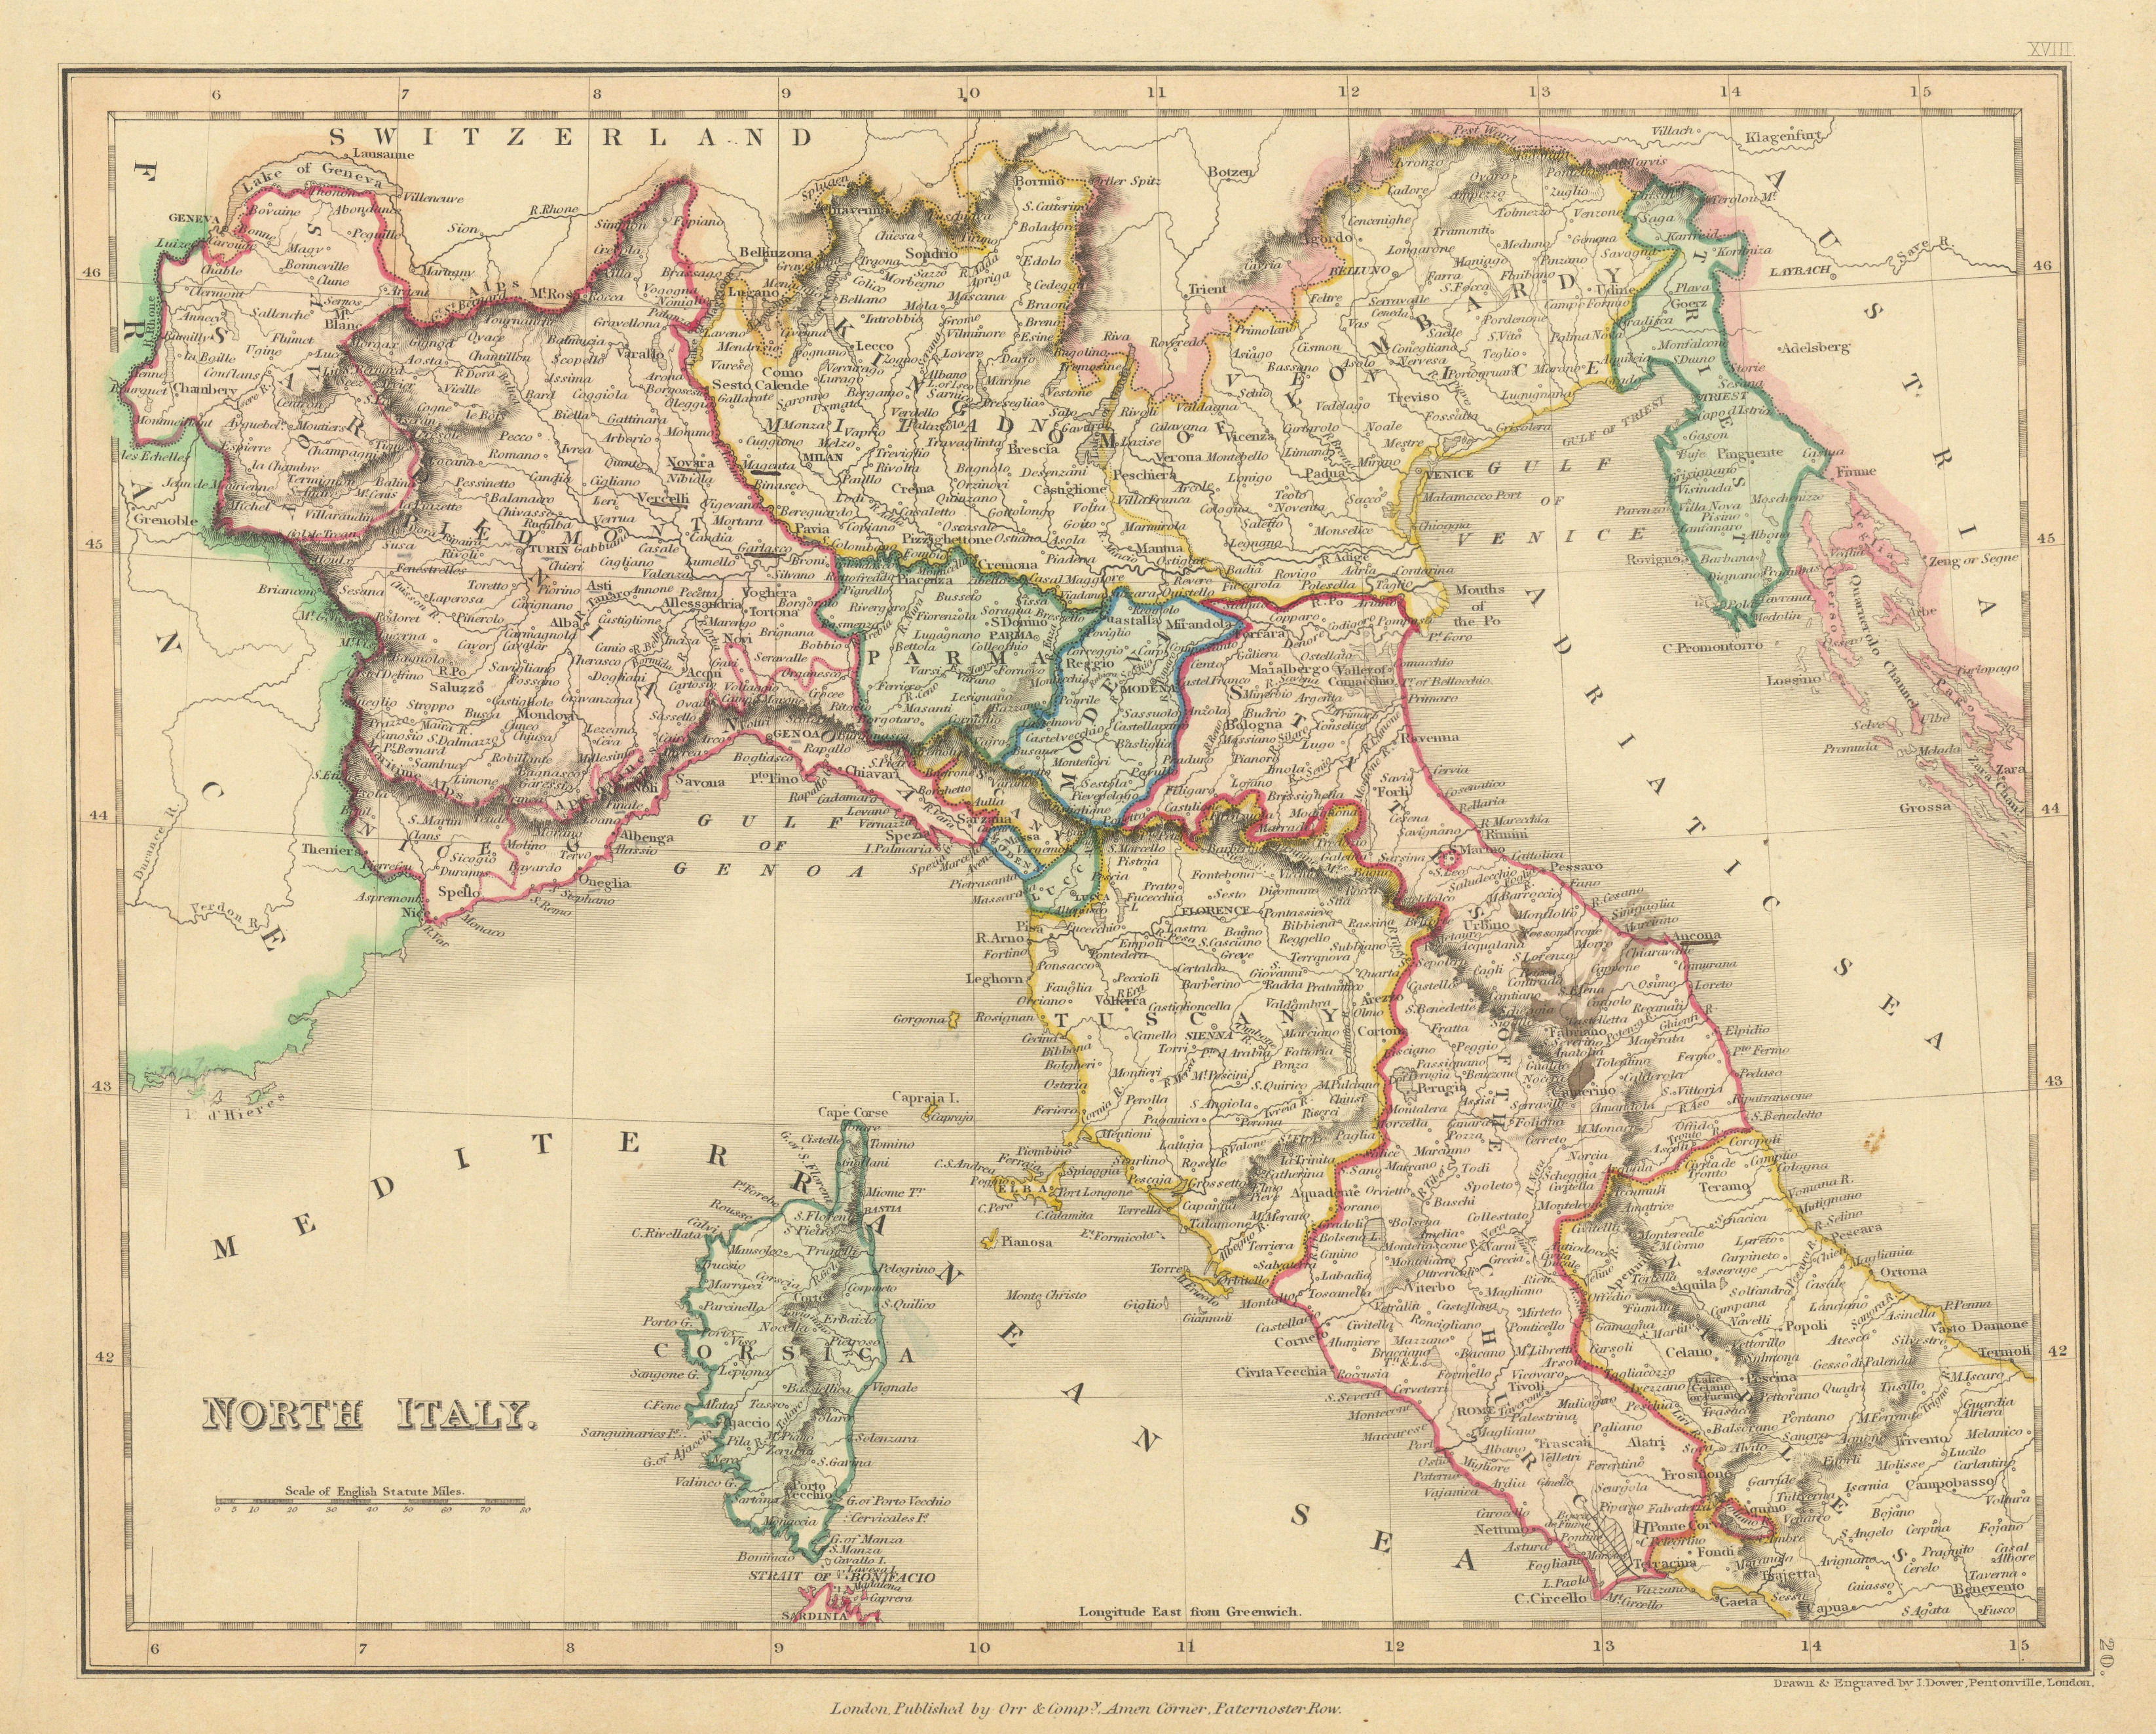 North Italy with Savoie, Istria & Alpes-Maritimes. Papal States. DOWER 1845 map